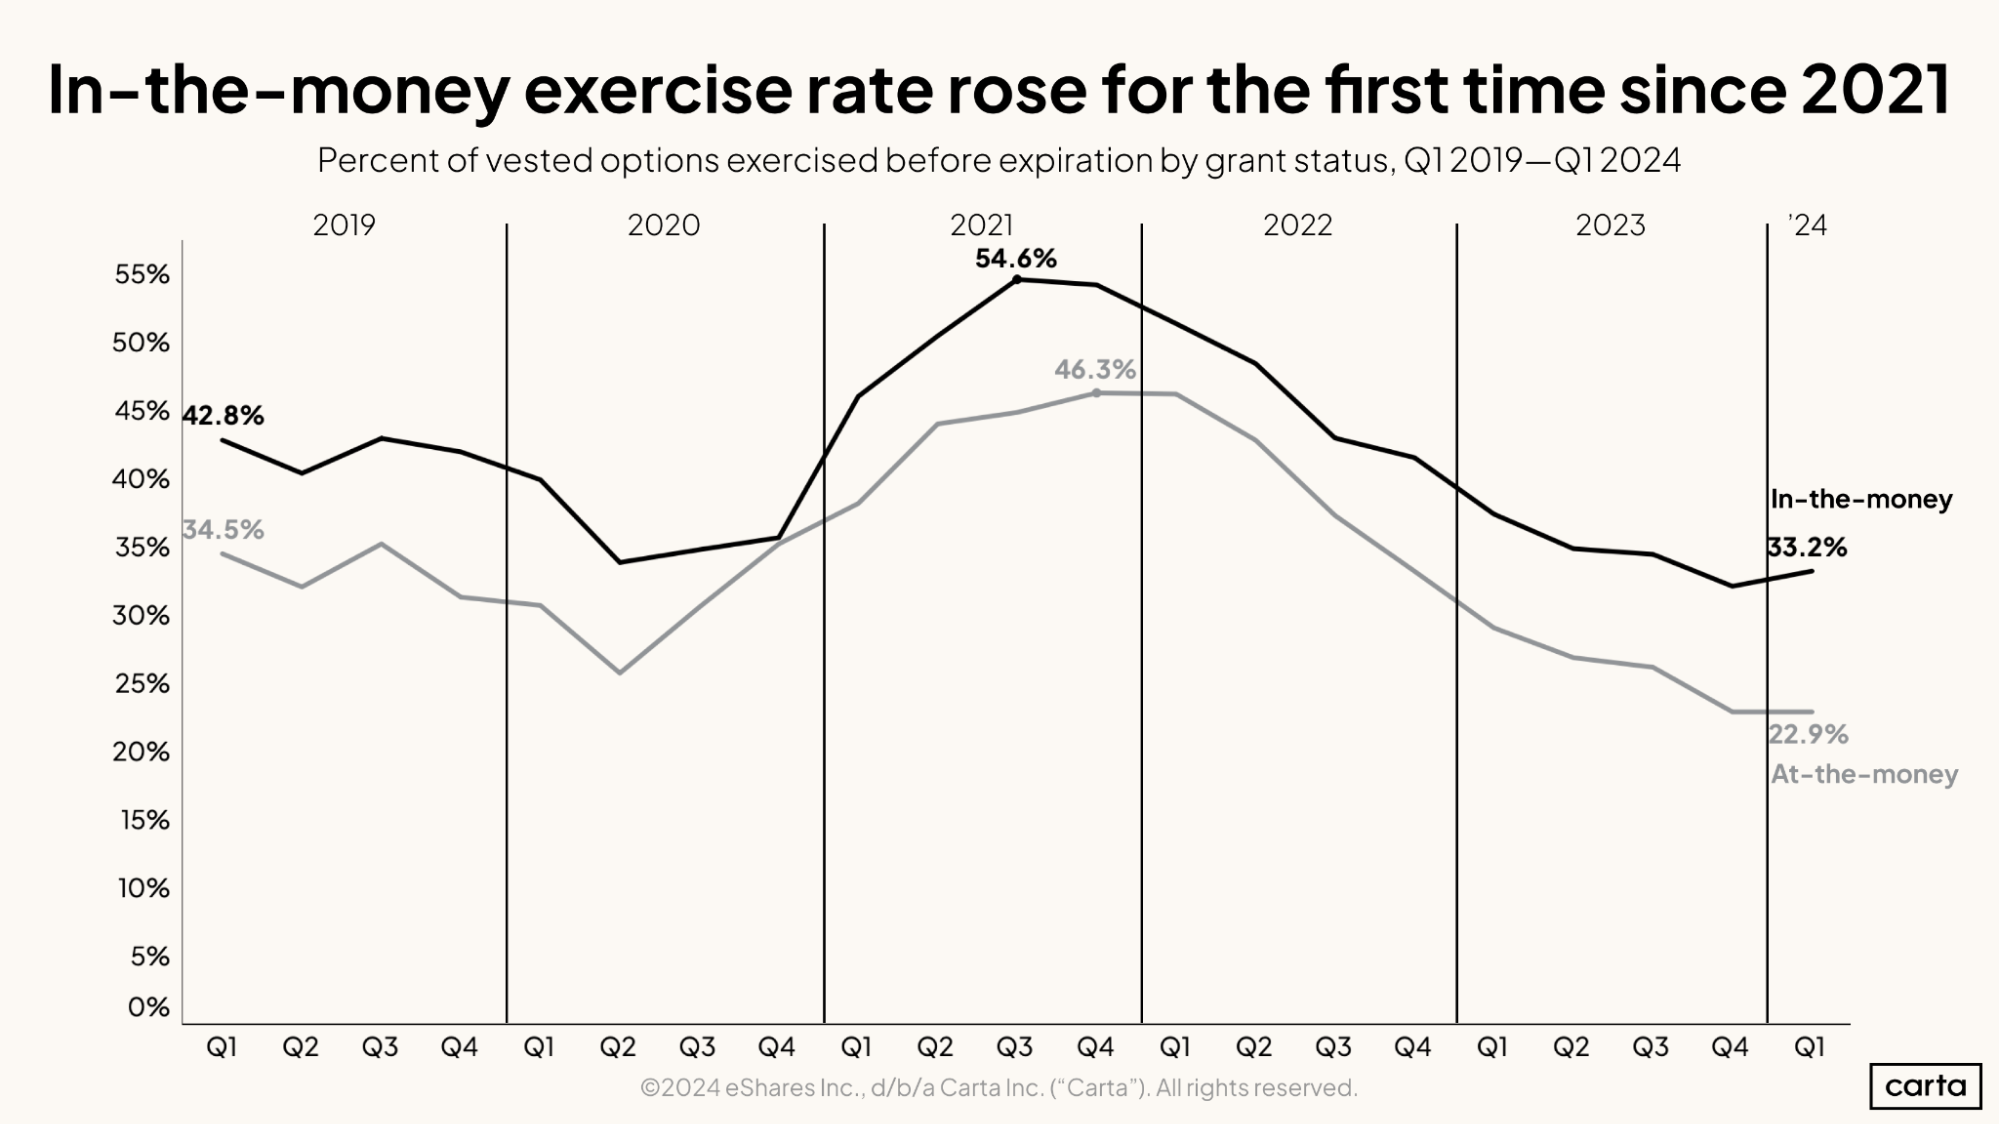 In-the-money exercise rate rose for the first time since 2021